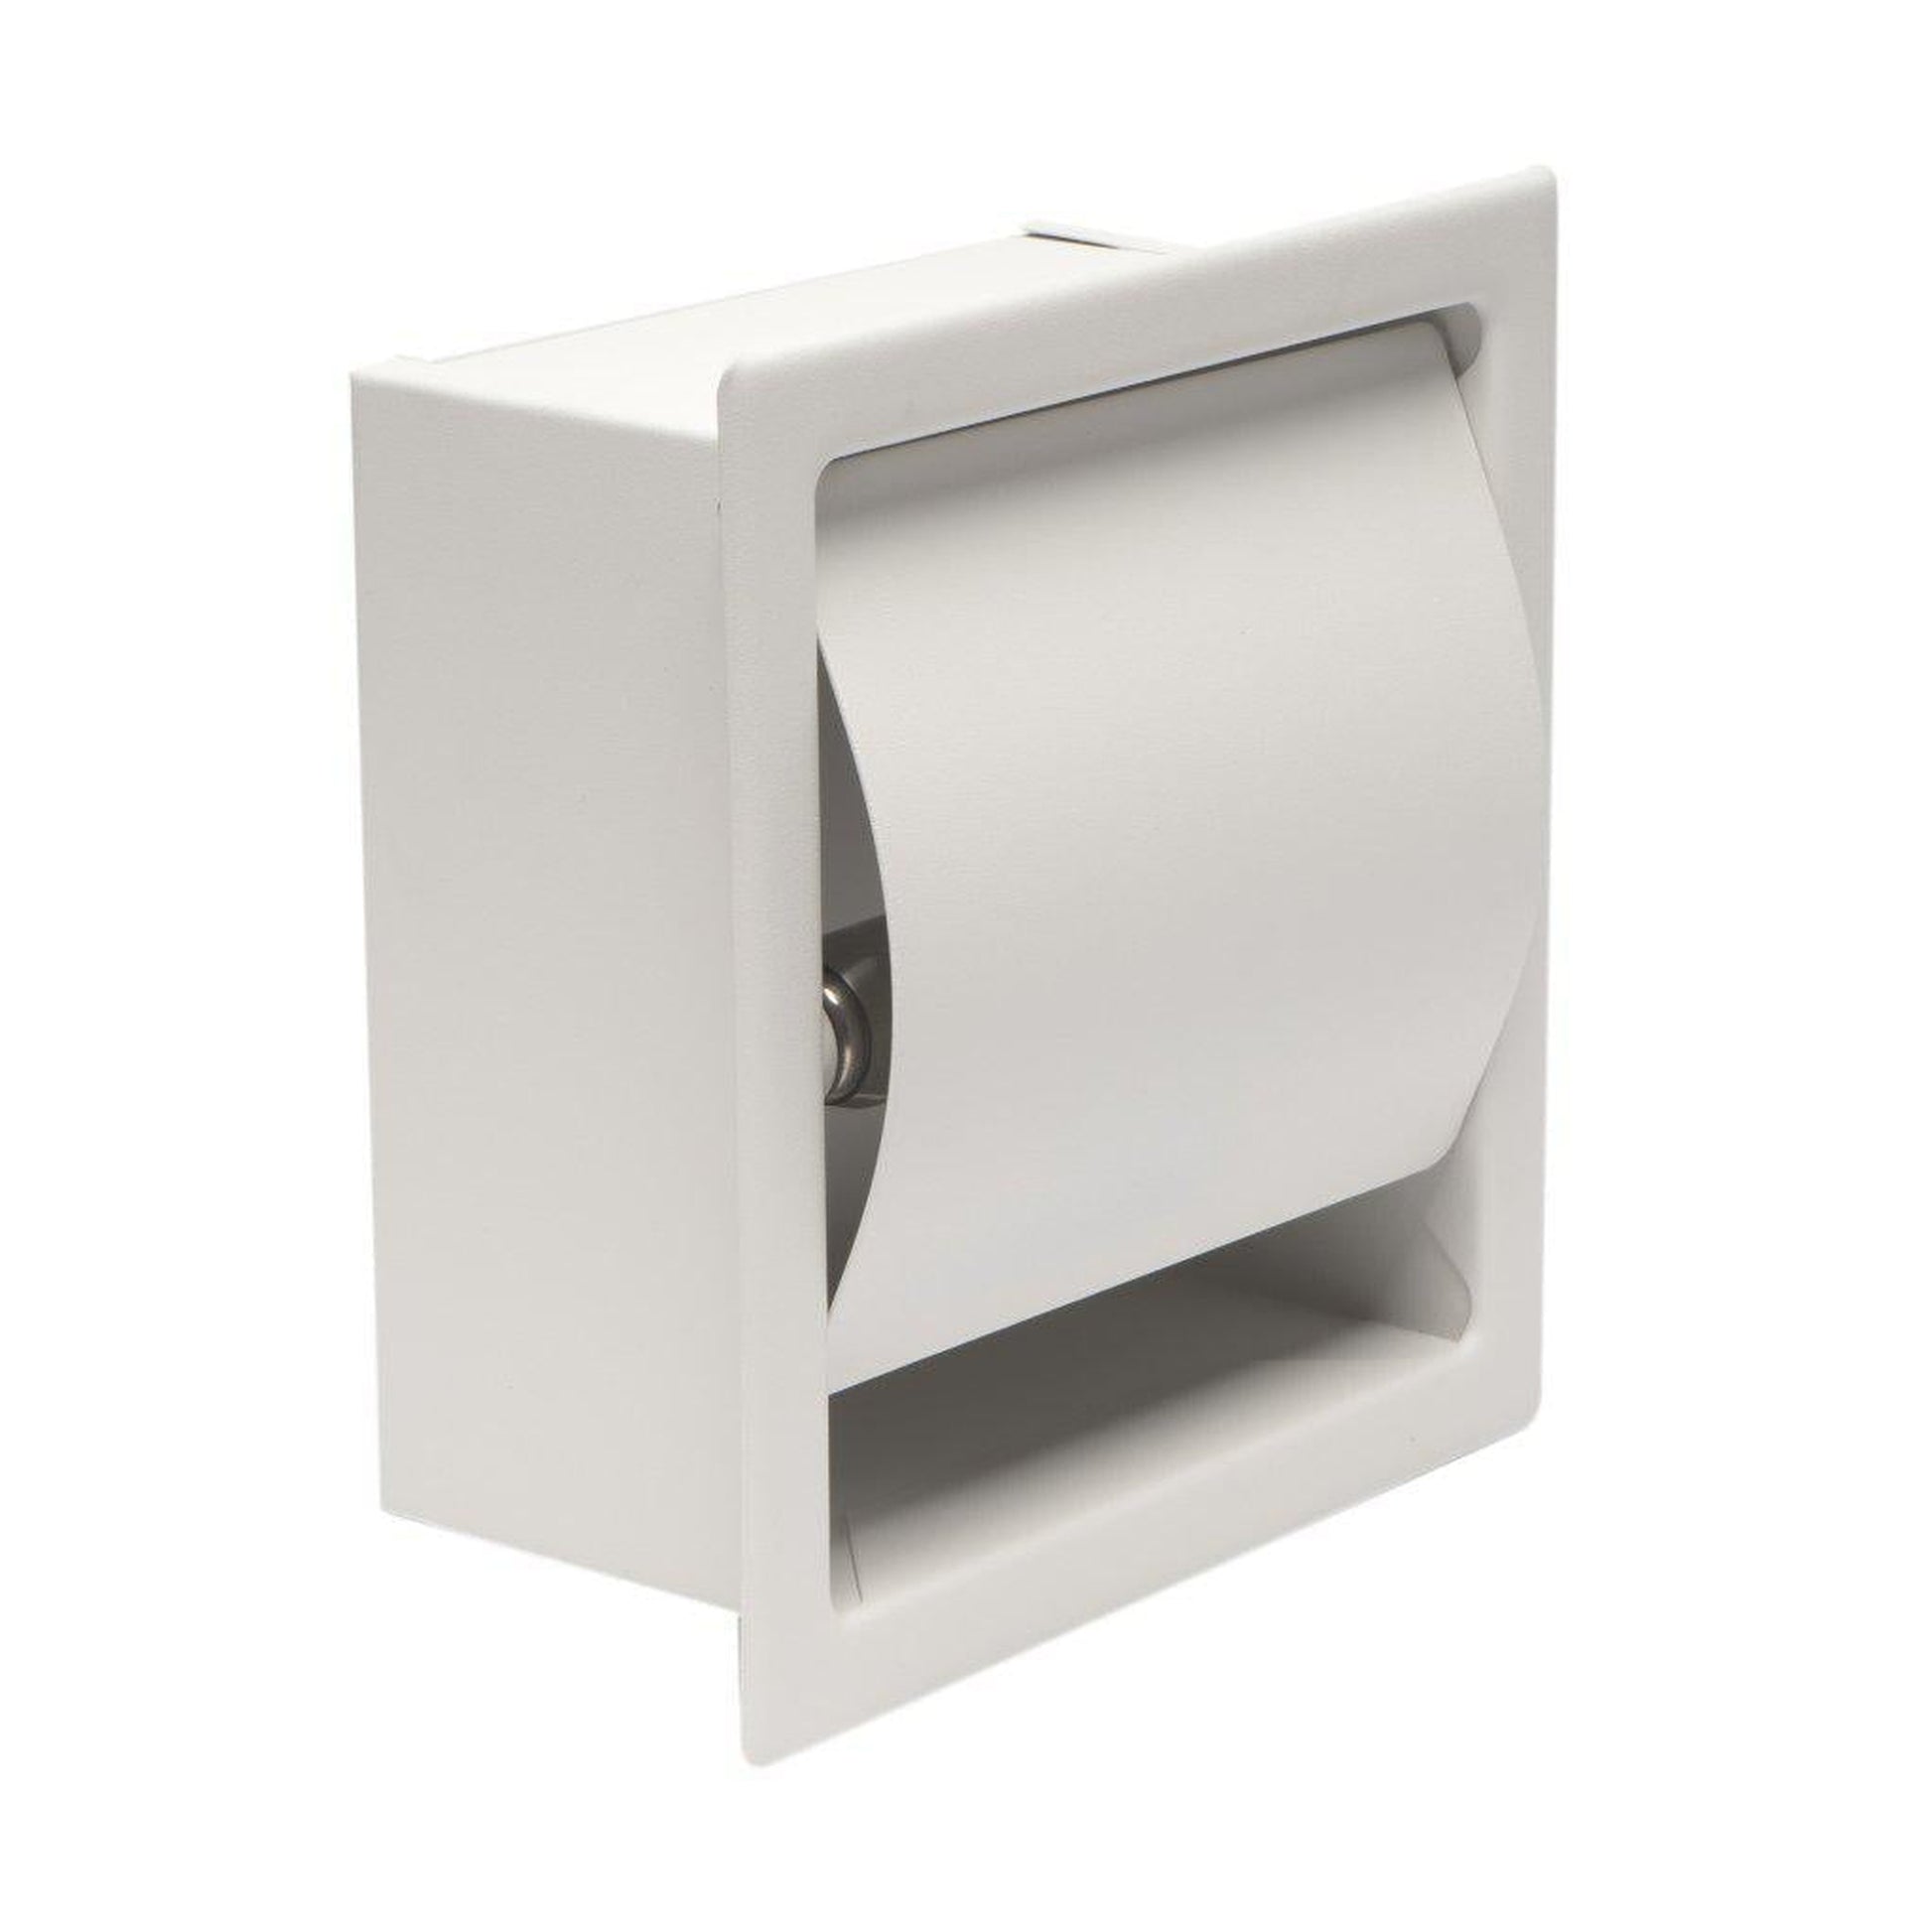 ALFI brand ABTPC77 Stainless Steel Recessed Toilet Paper Holder with Cover